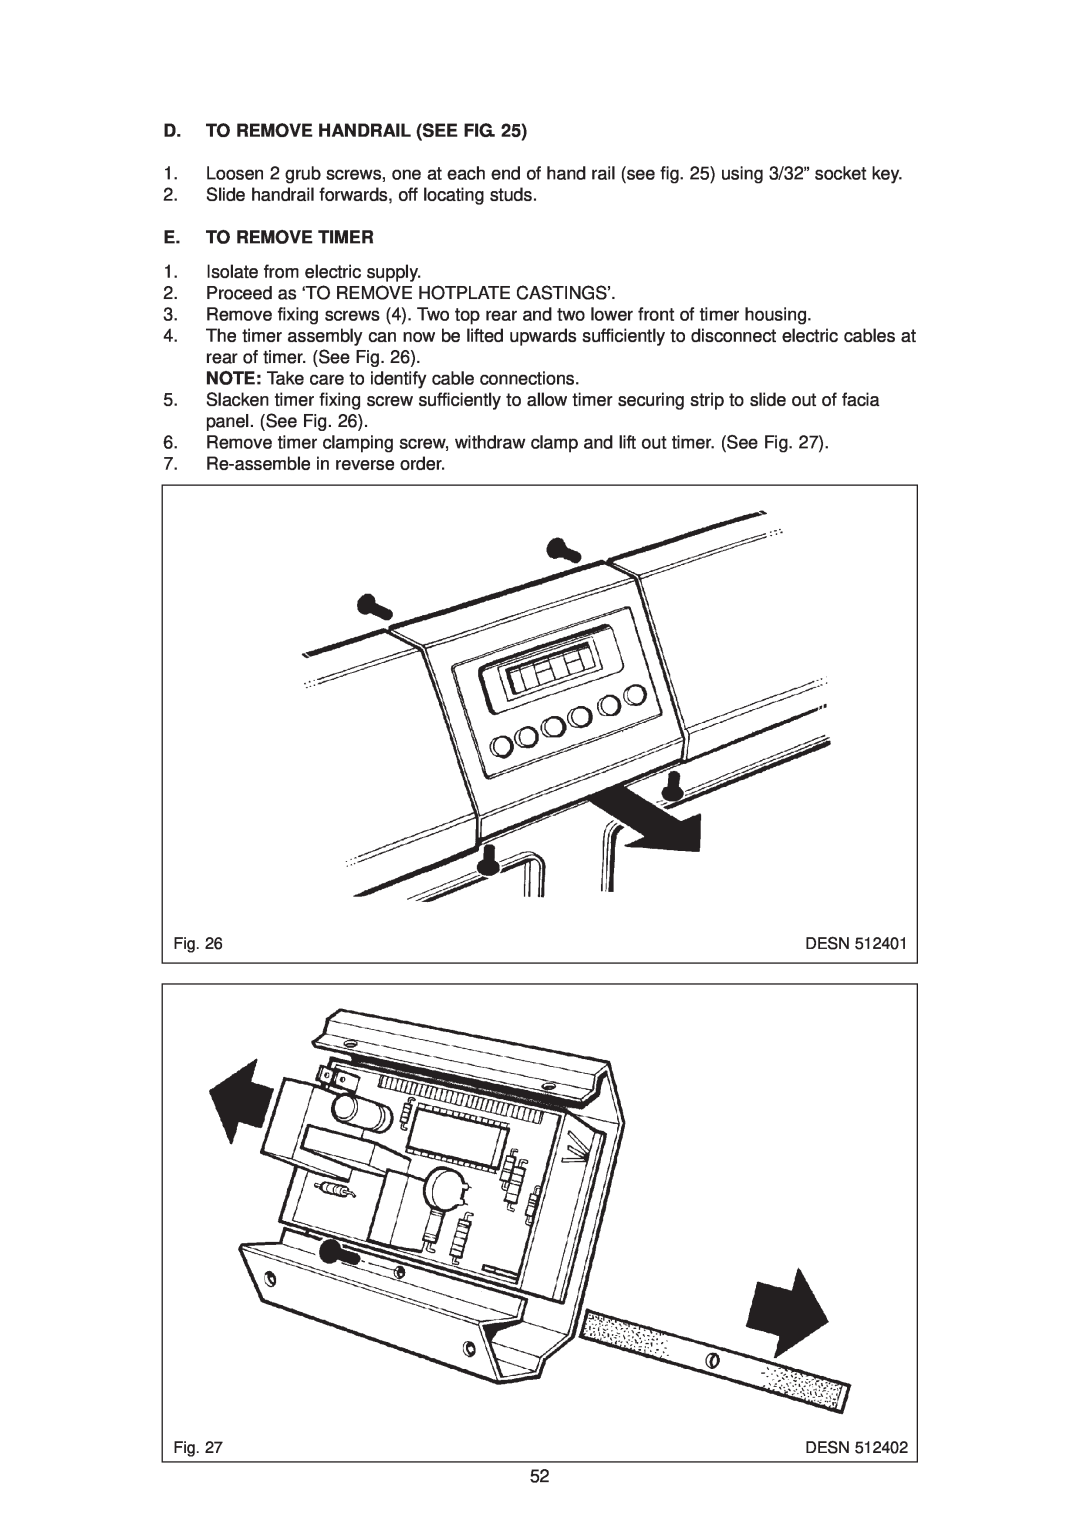 Aga Ranges DC6 (FFD) owner manual D. To Remove Handrail See Fig, E. To Remove Timer 